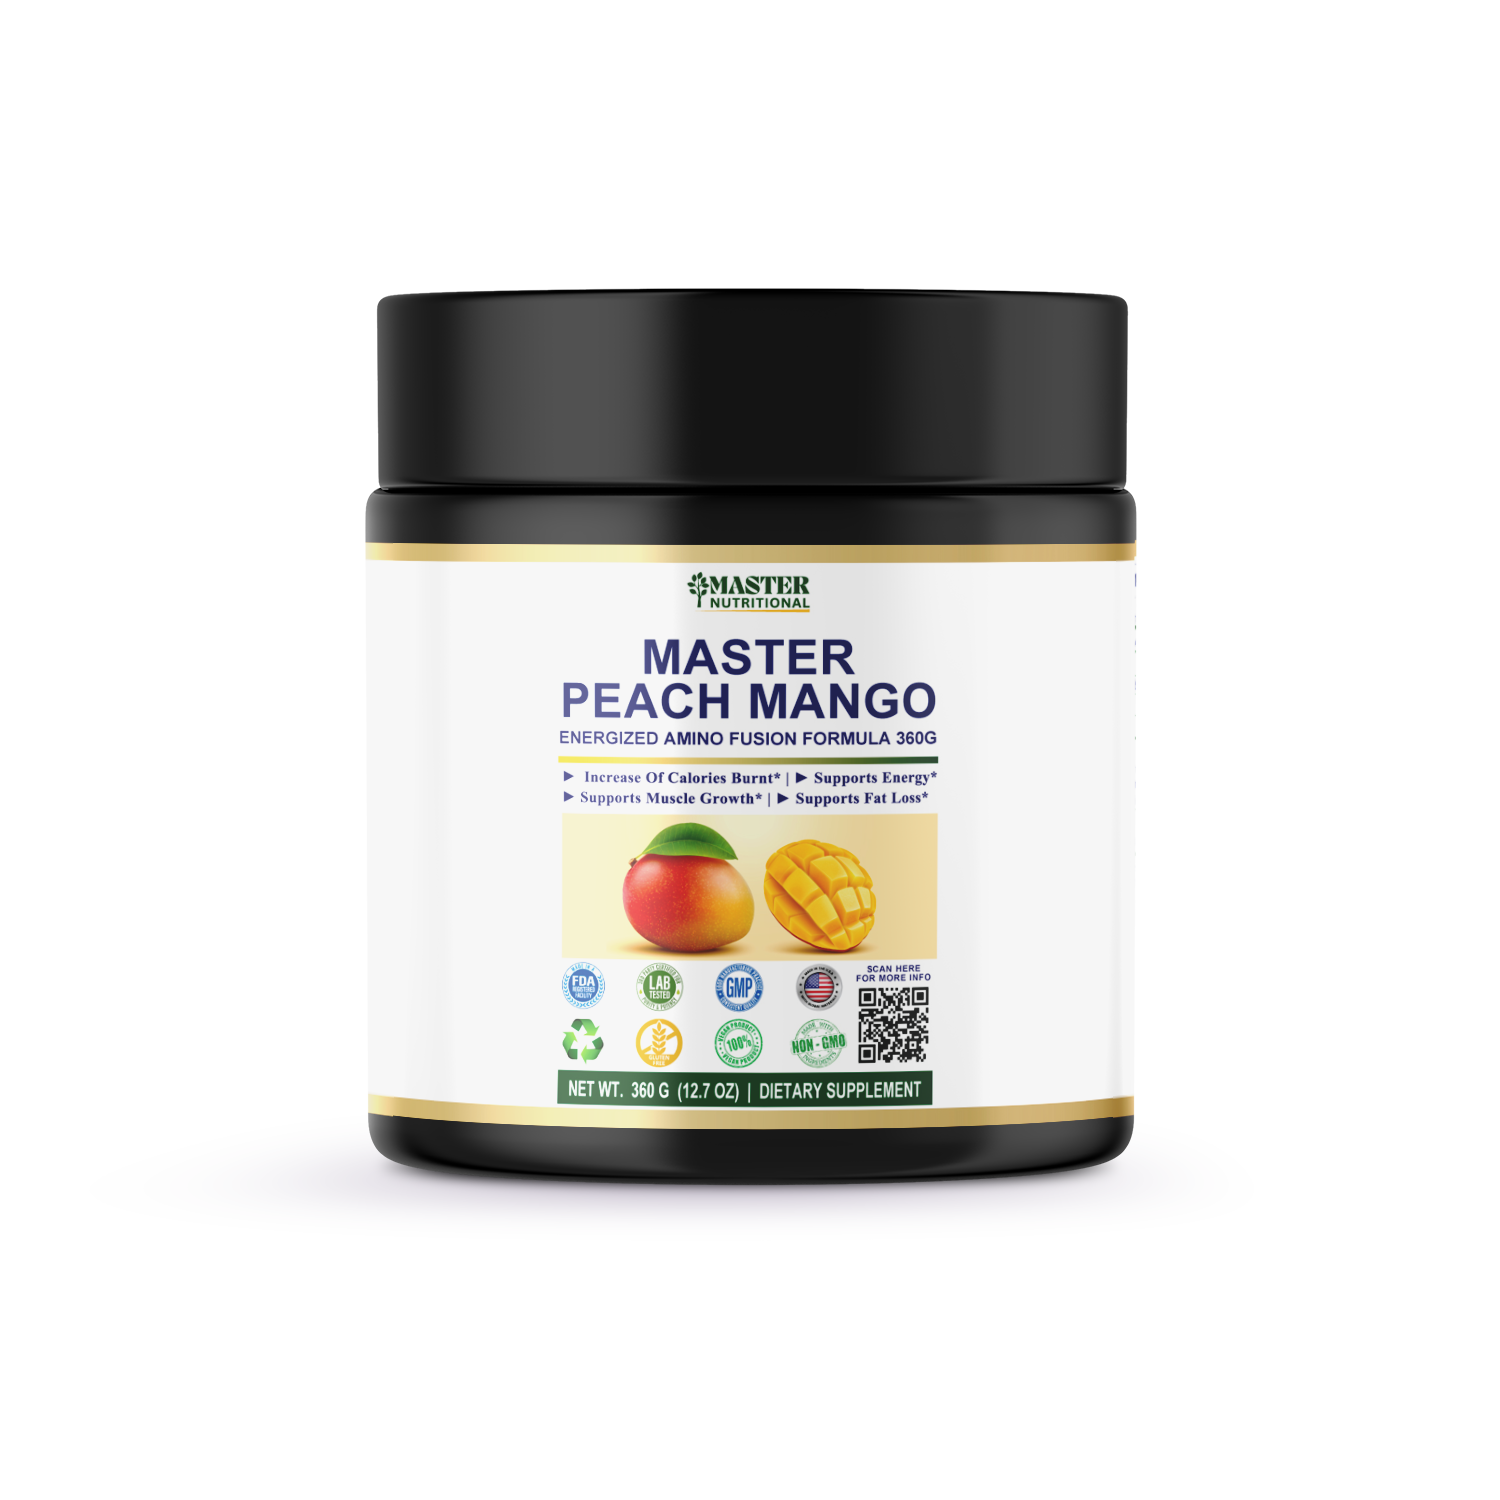 Master Peach Mango Energized Amino Fusion Formula - Supports Cognition and Energy from Time to Time!